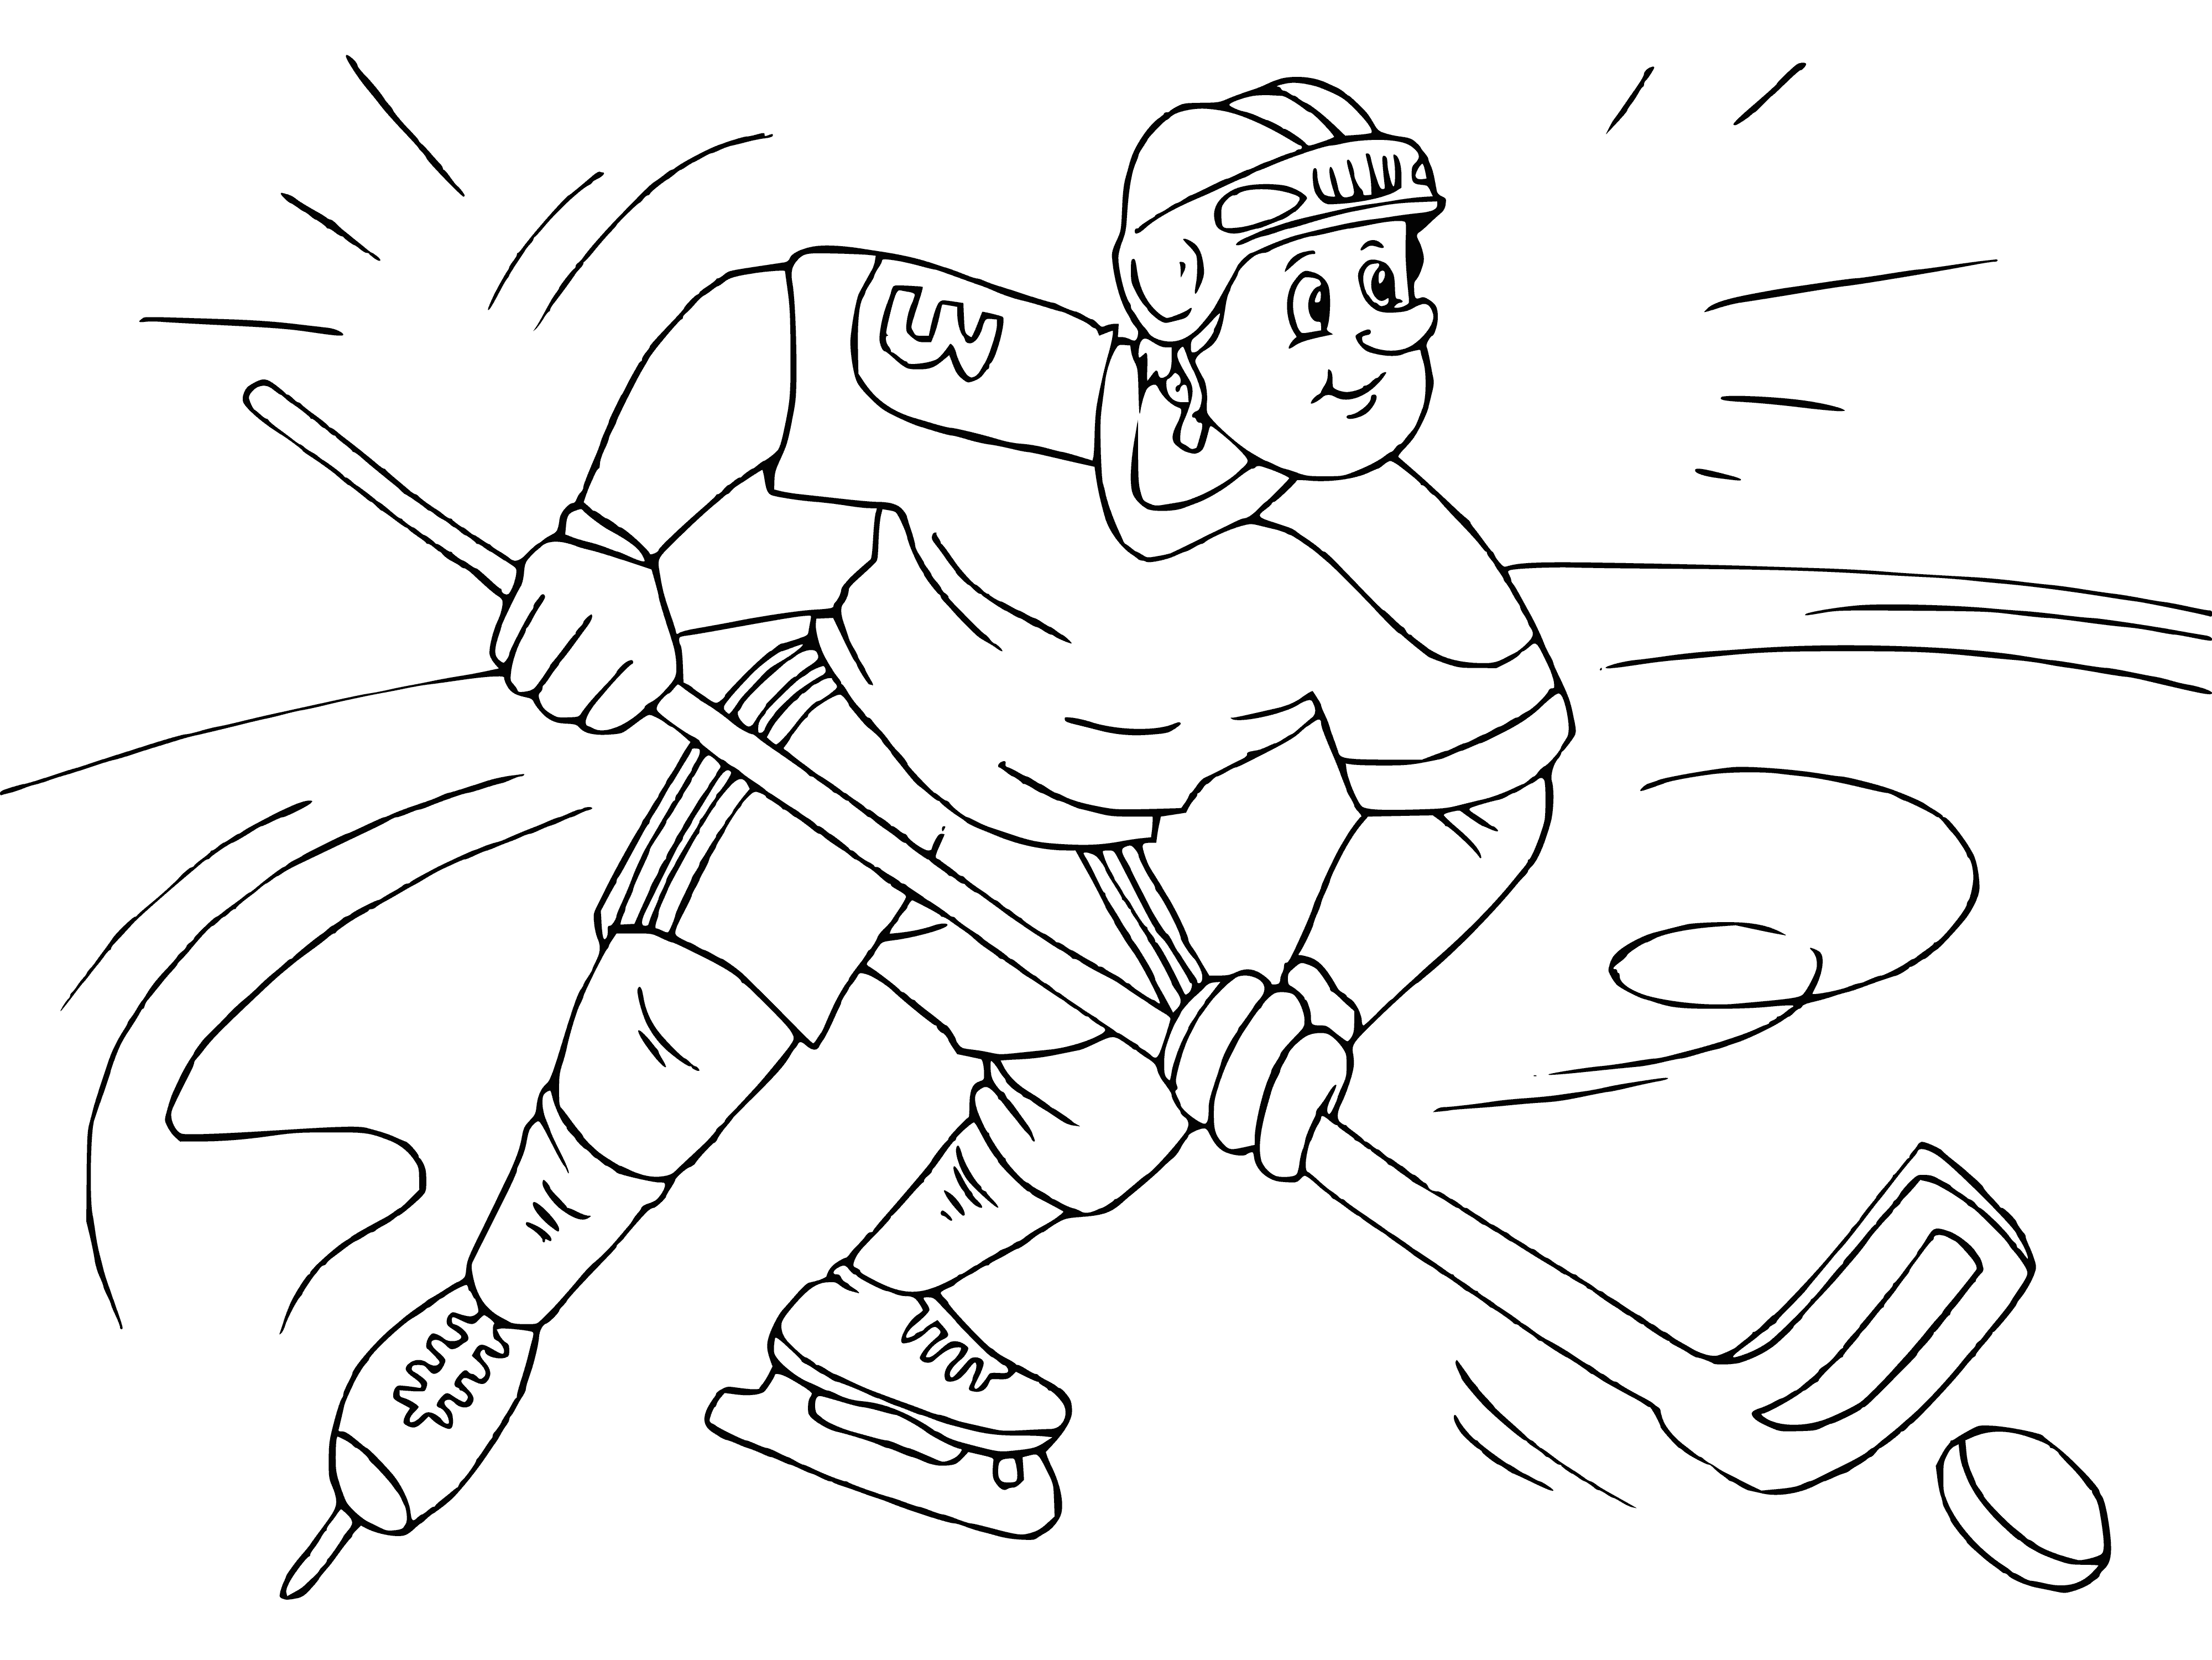 Hockey player coloring page